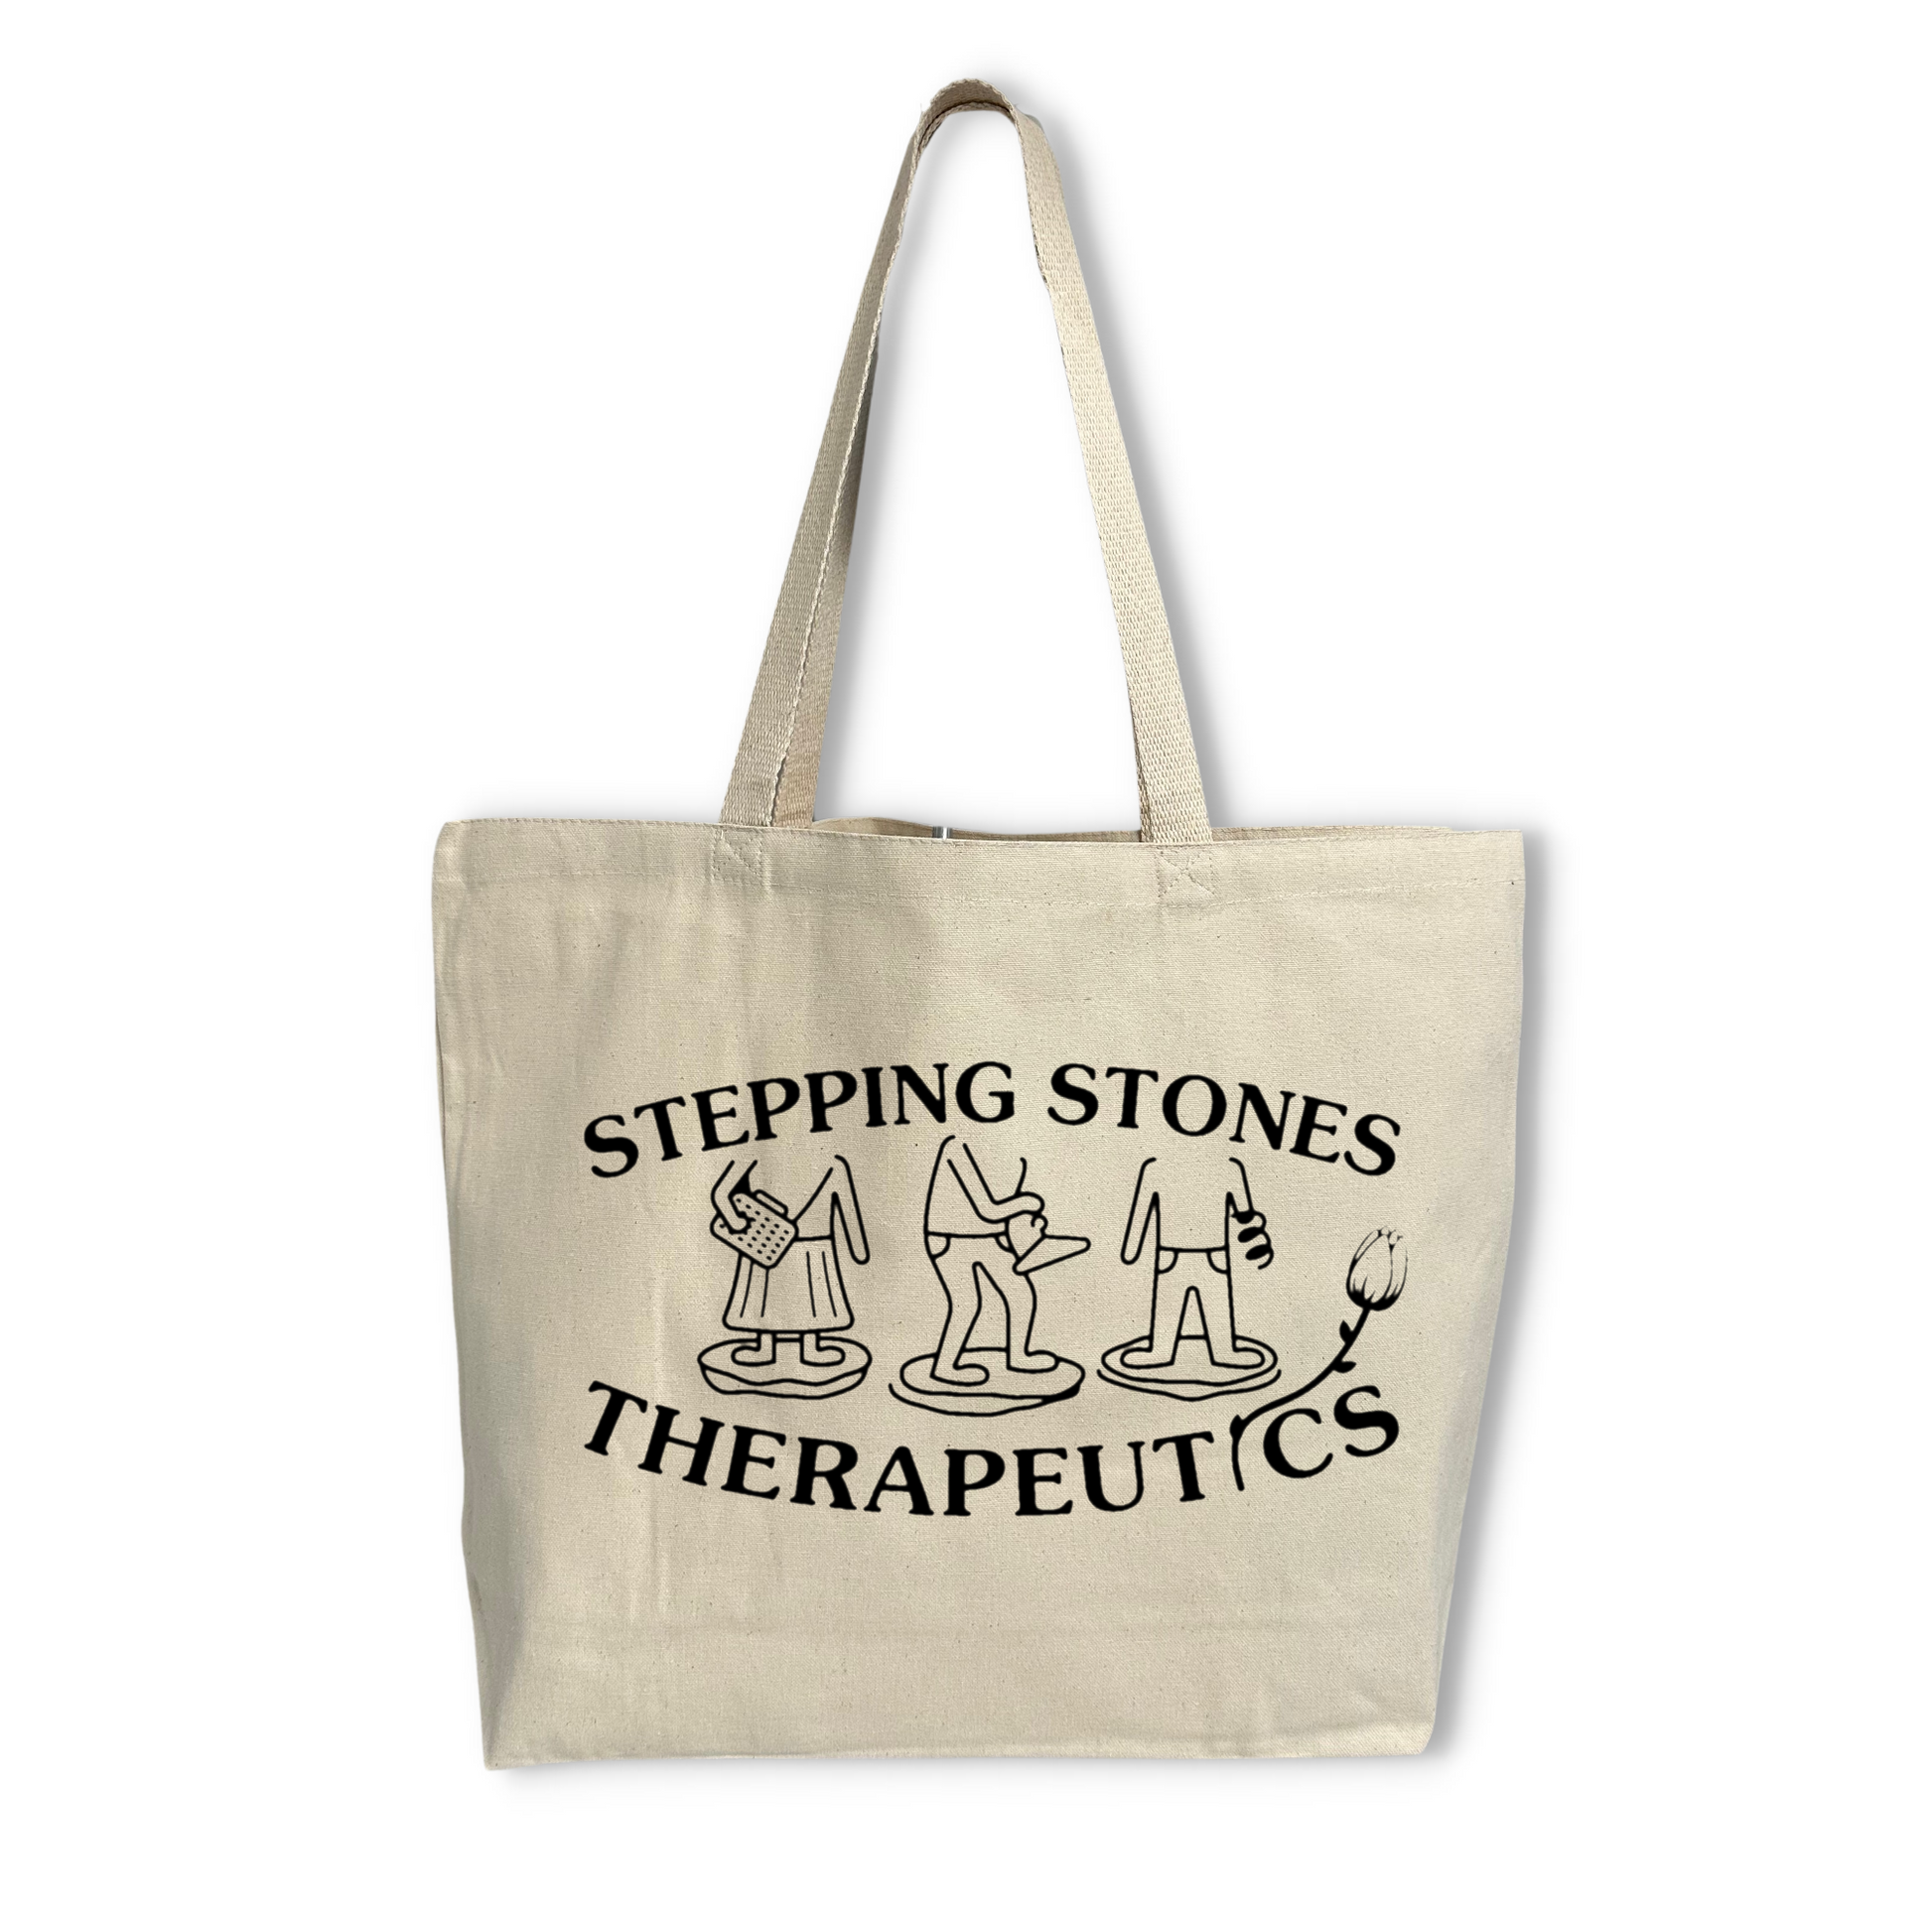 Wholesale Custom Printed Heavy Canvas Tote Bags, Large Size Promotional Tote Bags 